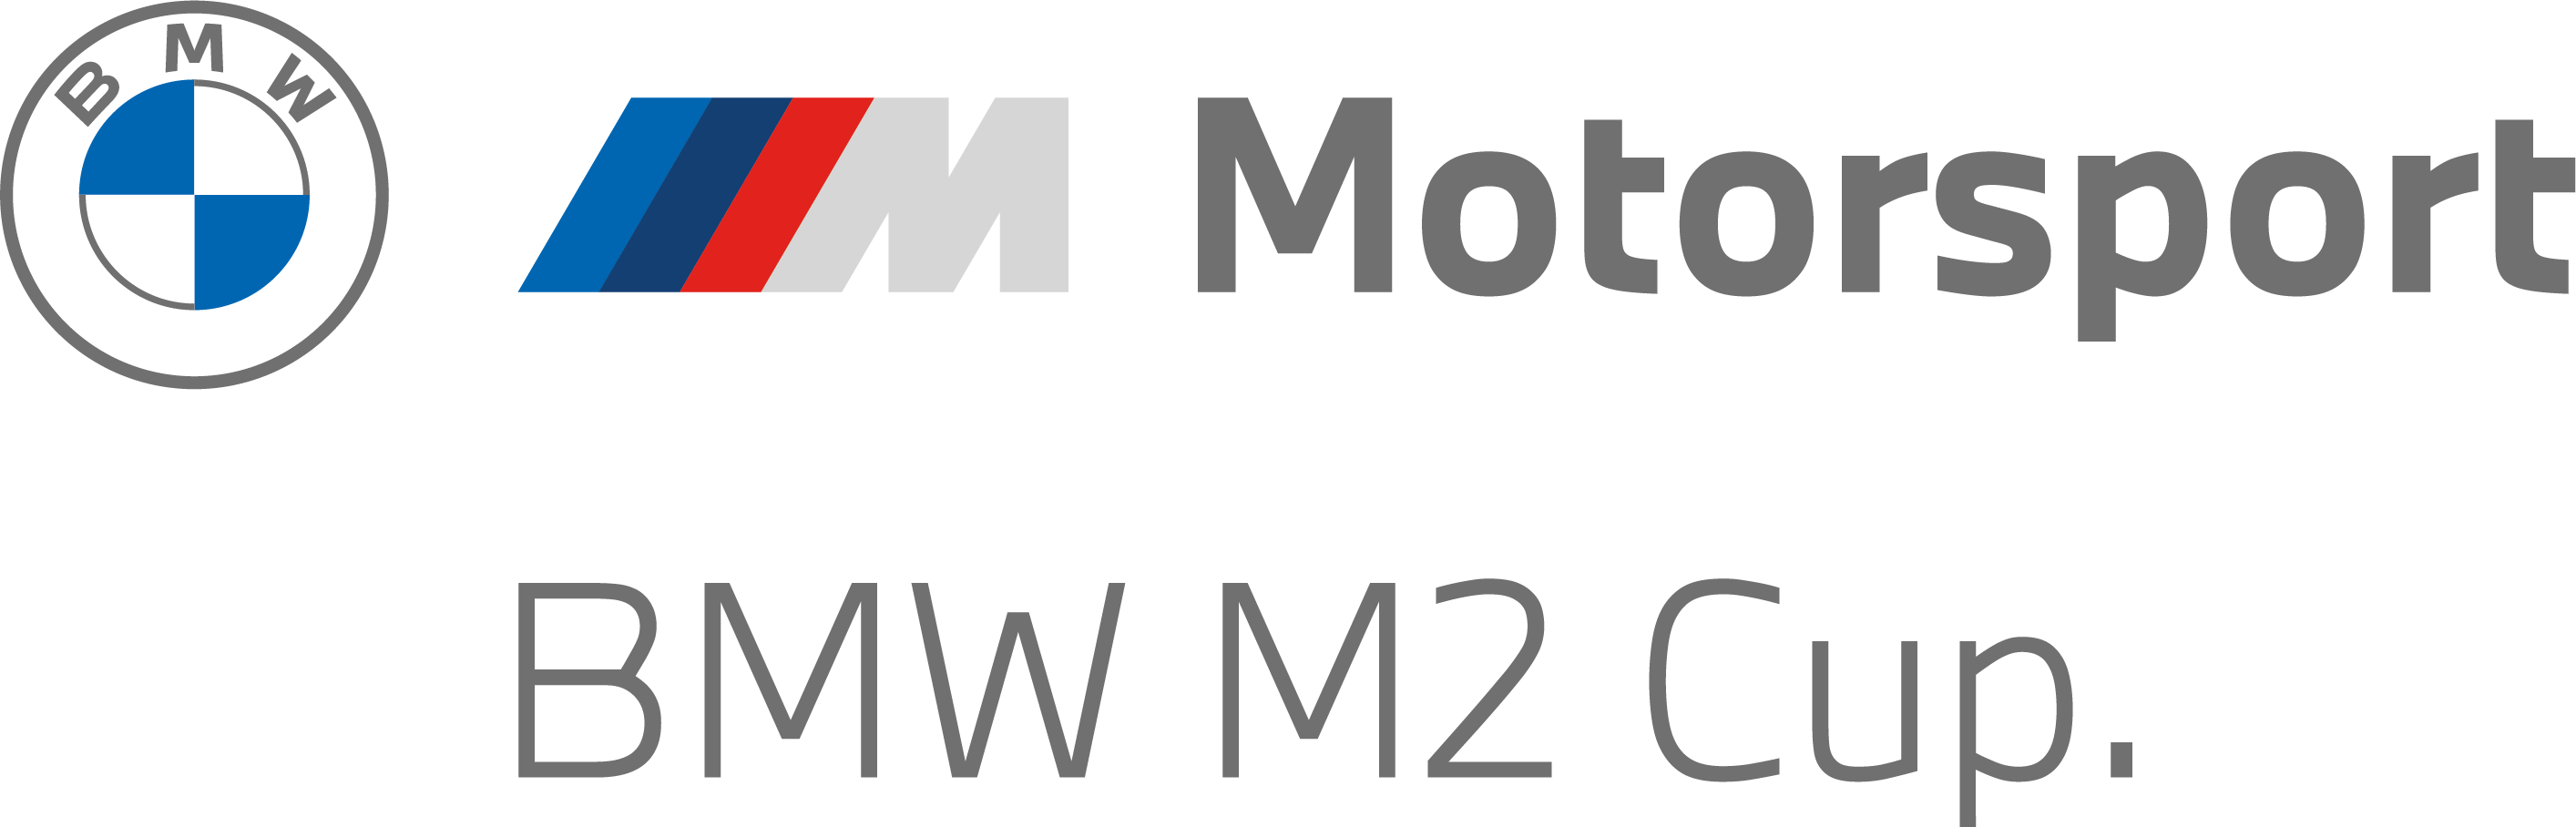 BMW M2 CUP - Your Dream is, to join BMW M Motorsport - DTM